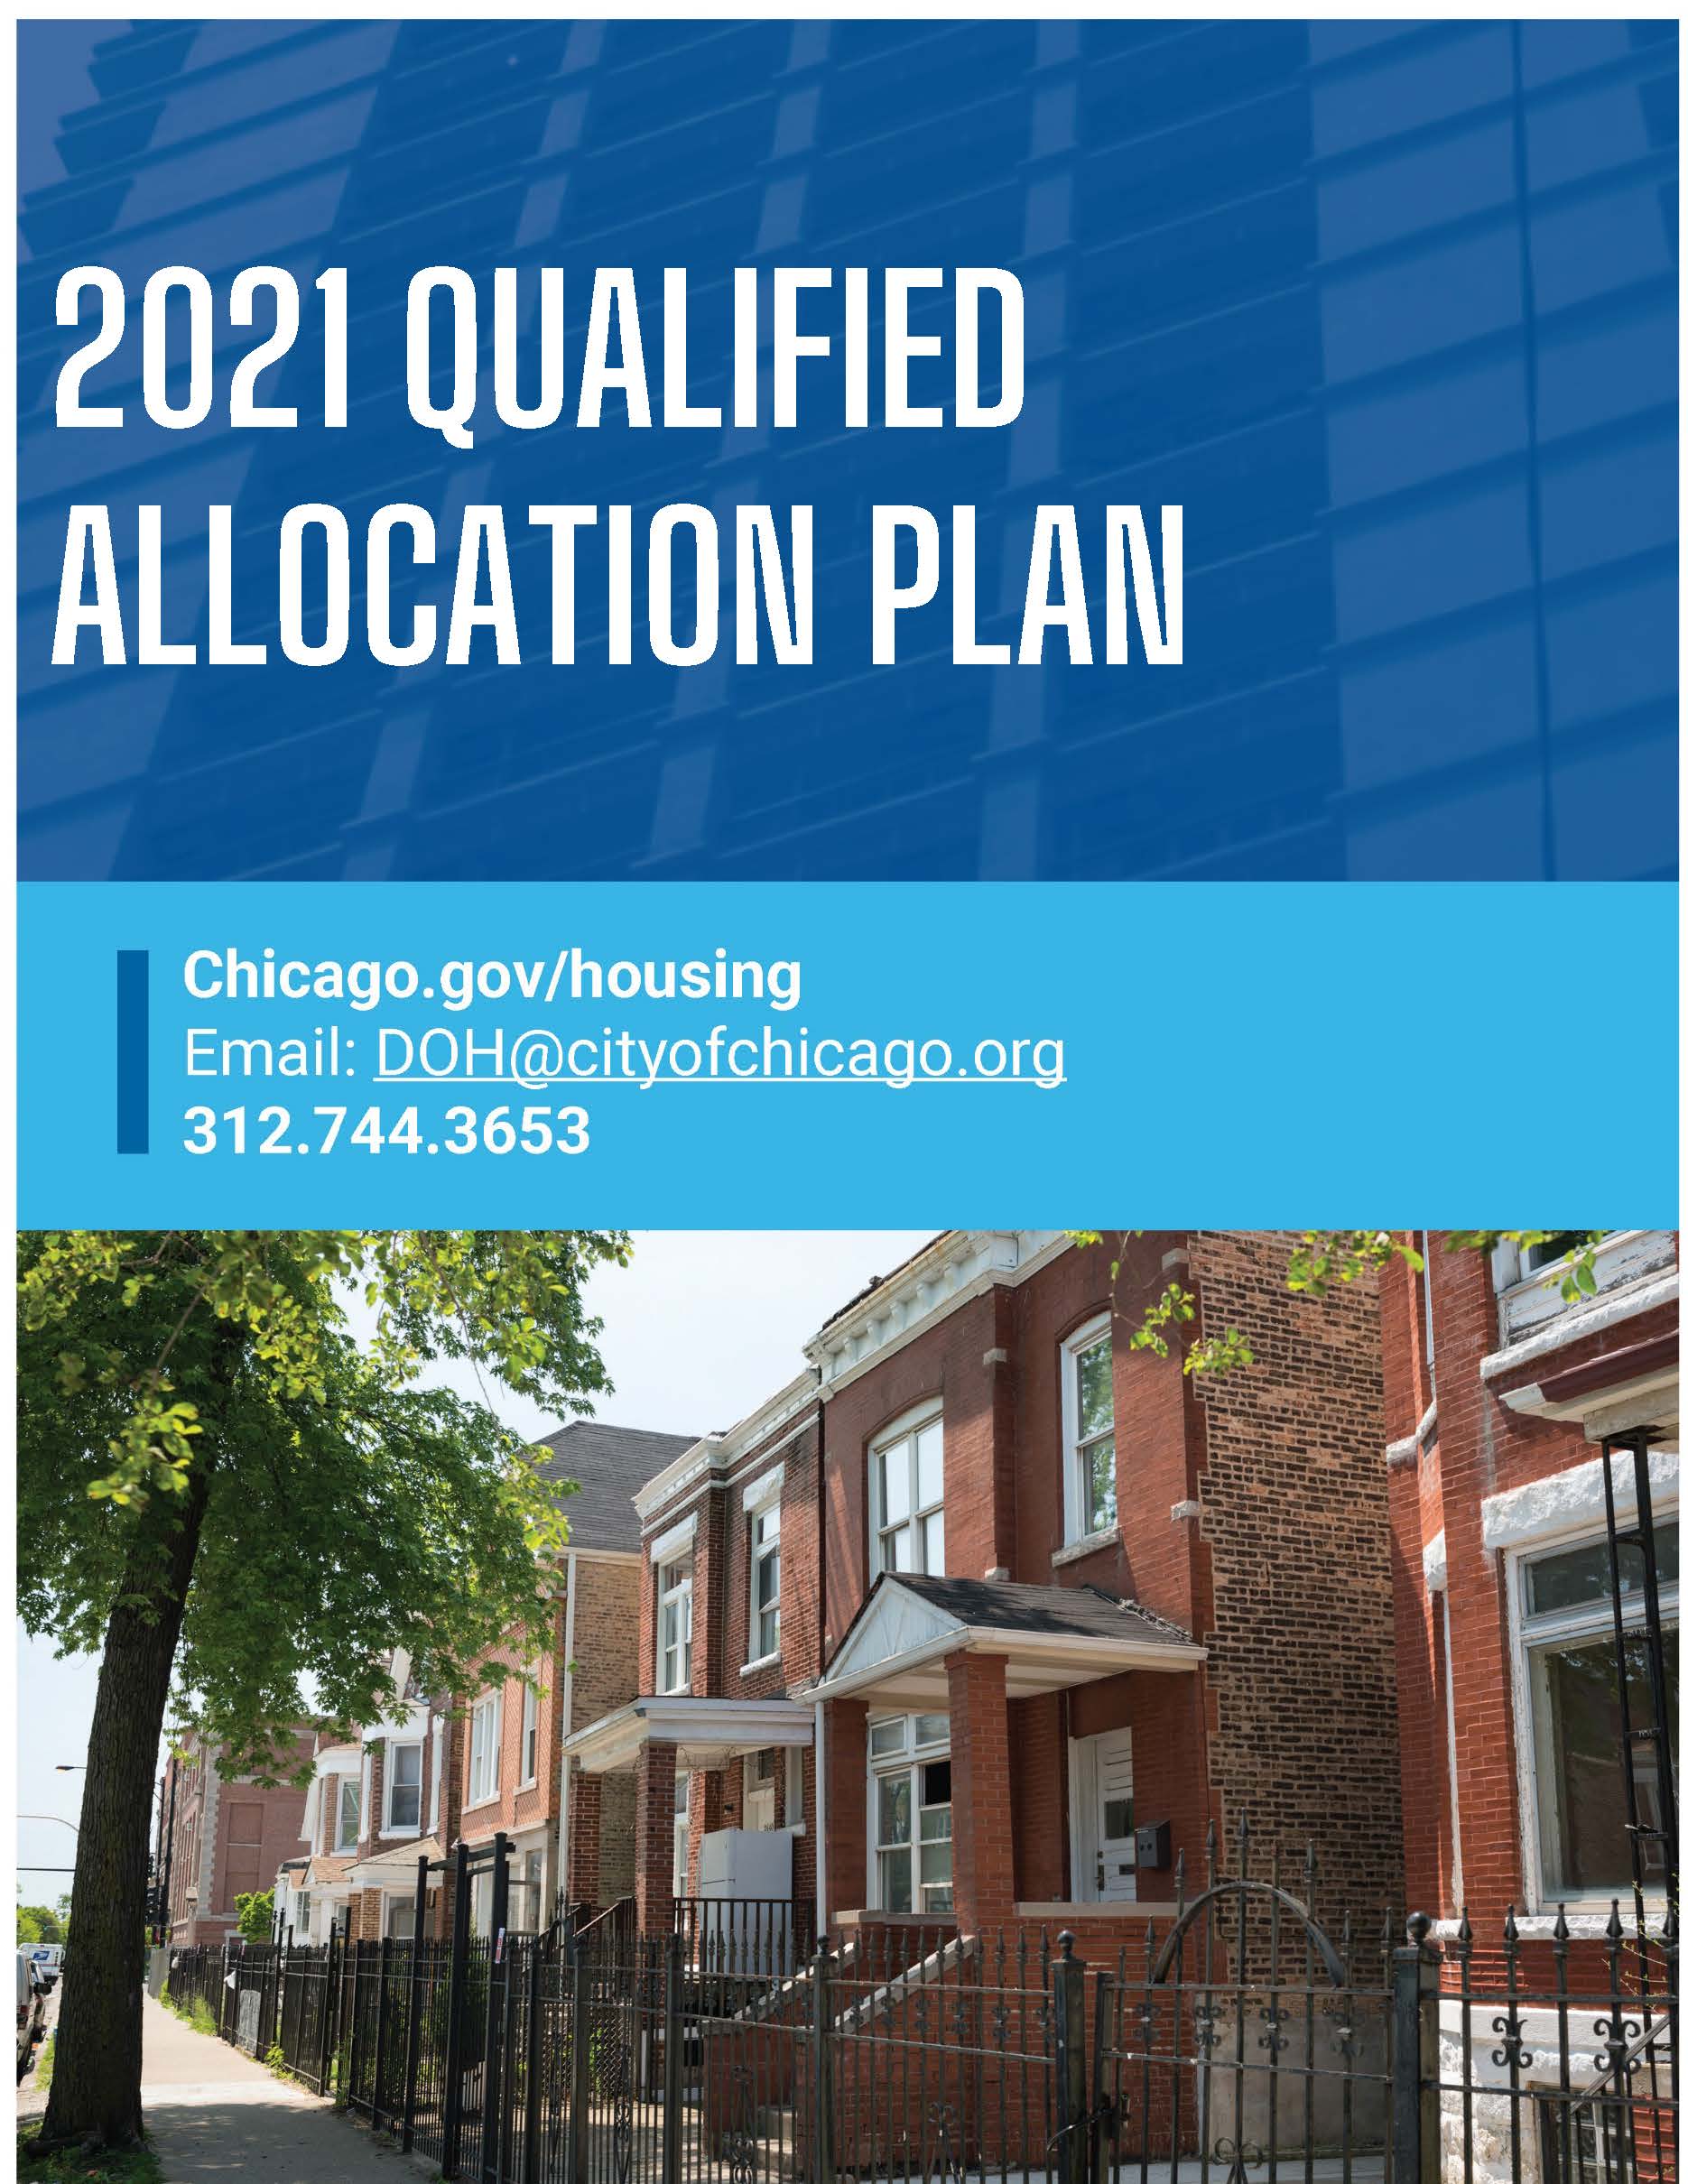 2021 Qualified Allocation Plan